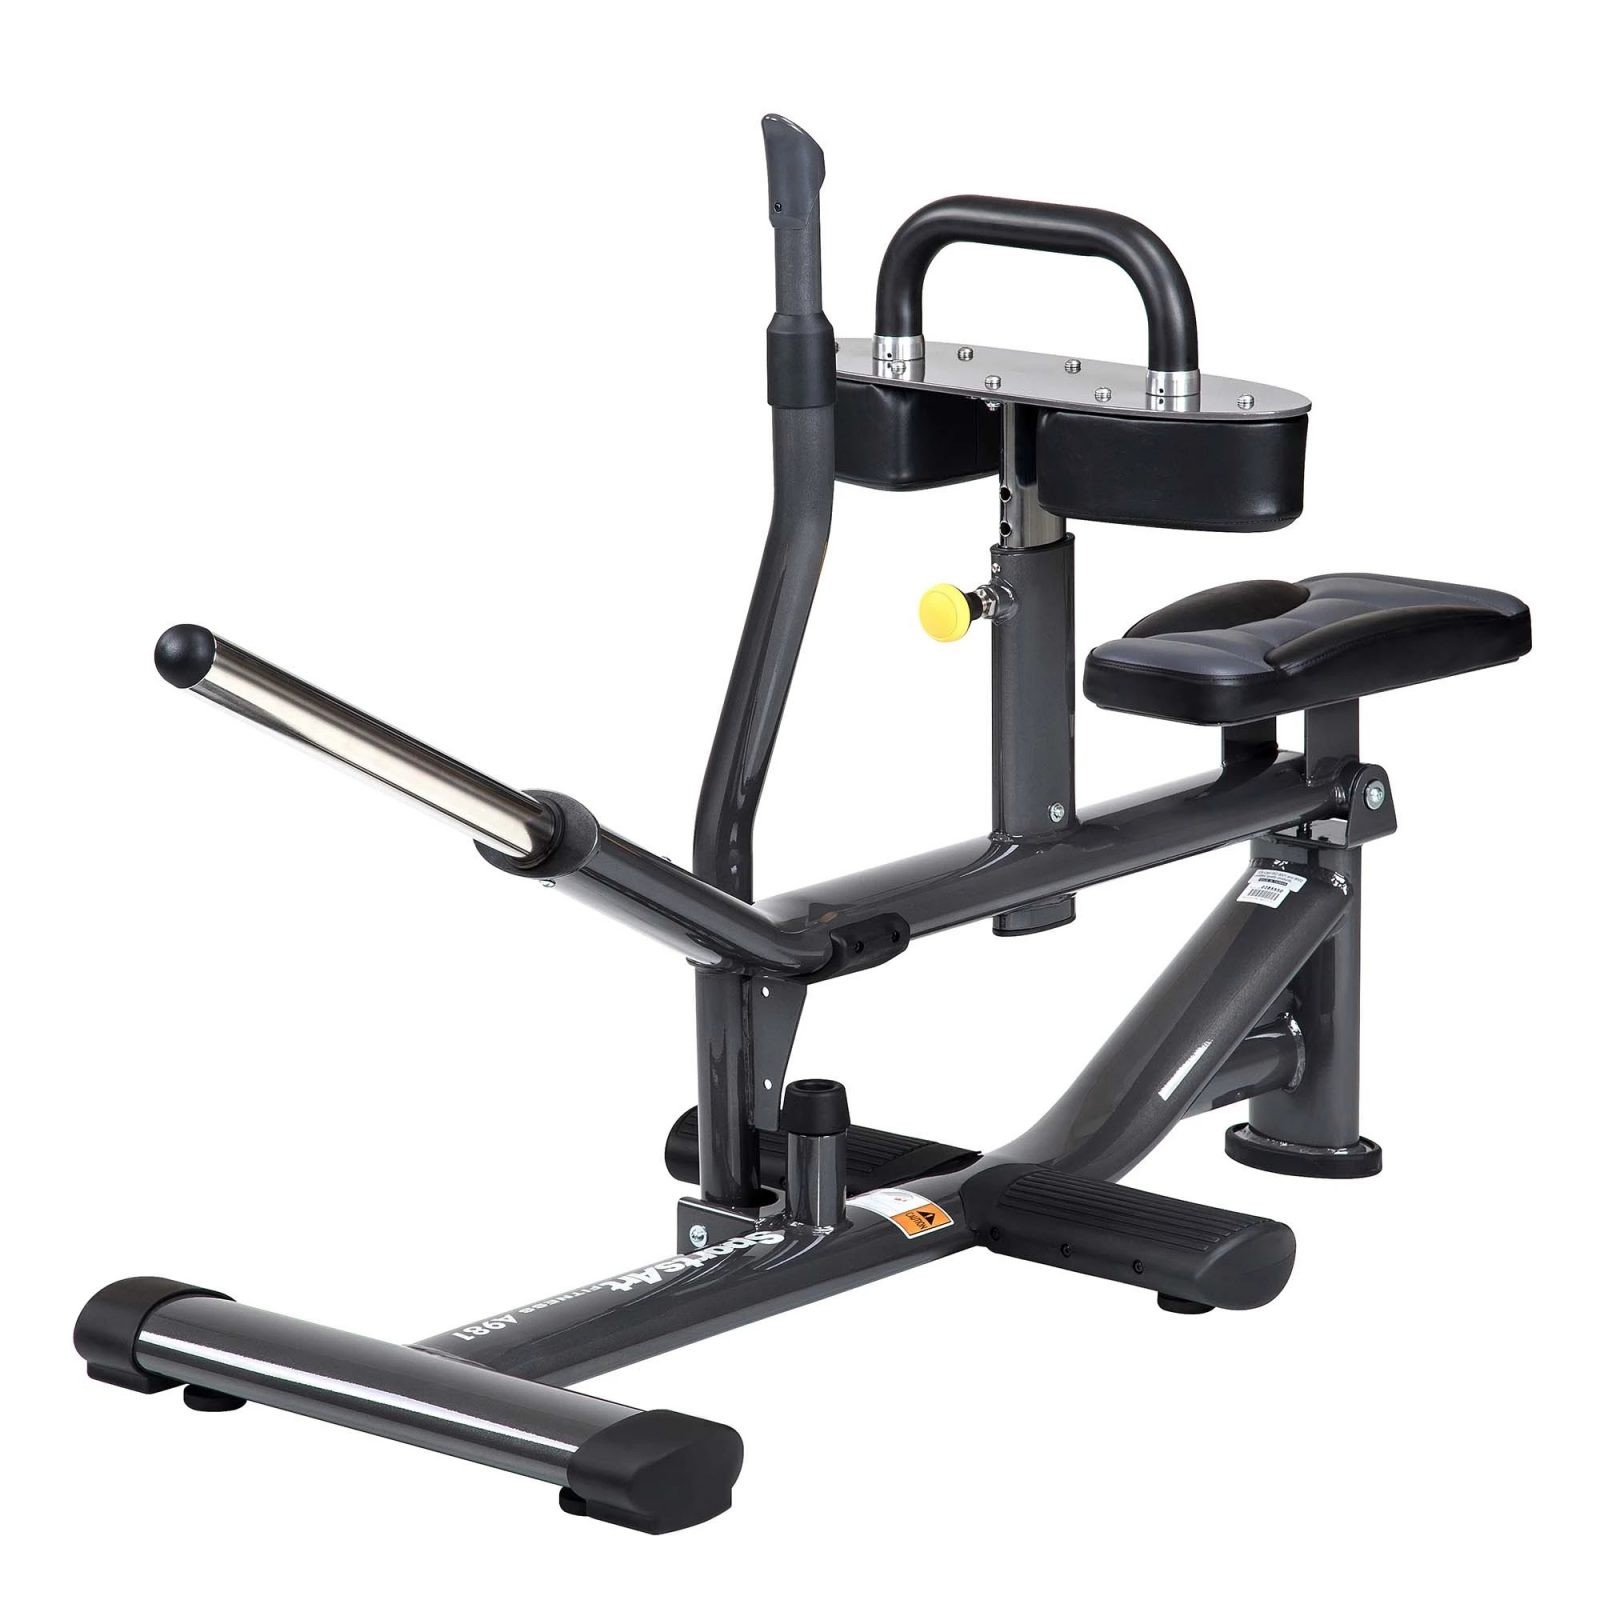 SportsArt A981 Plate Loaded Seated Calf Raise Machine (New)